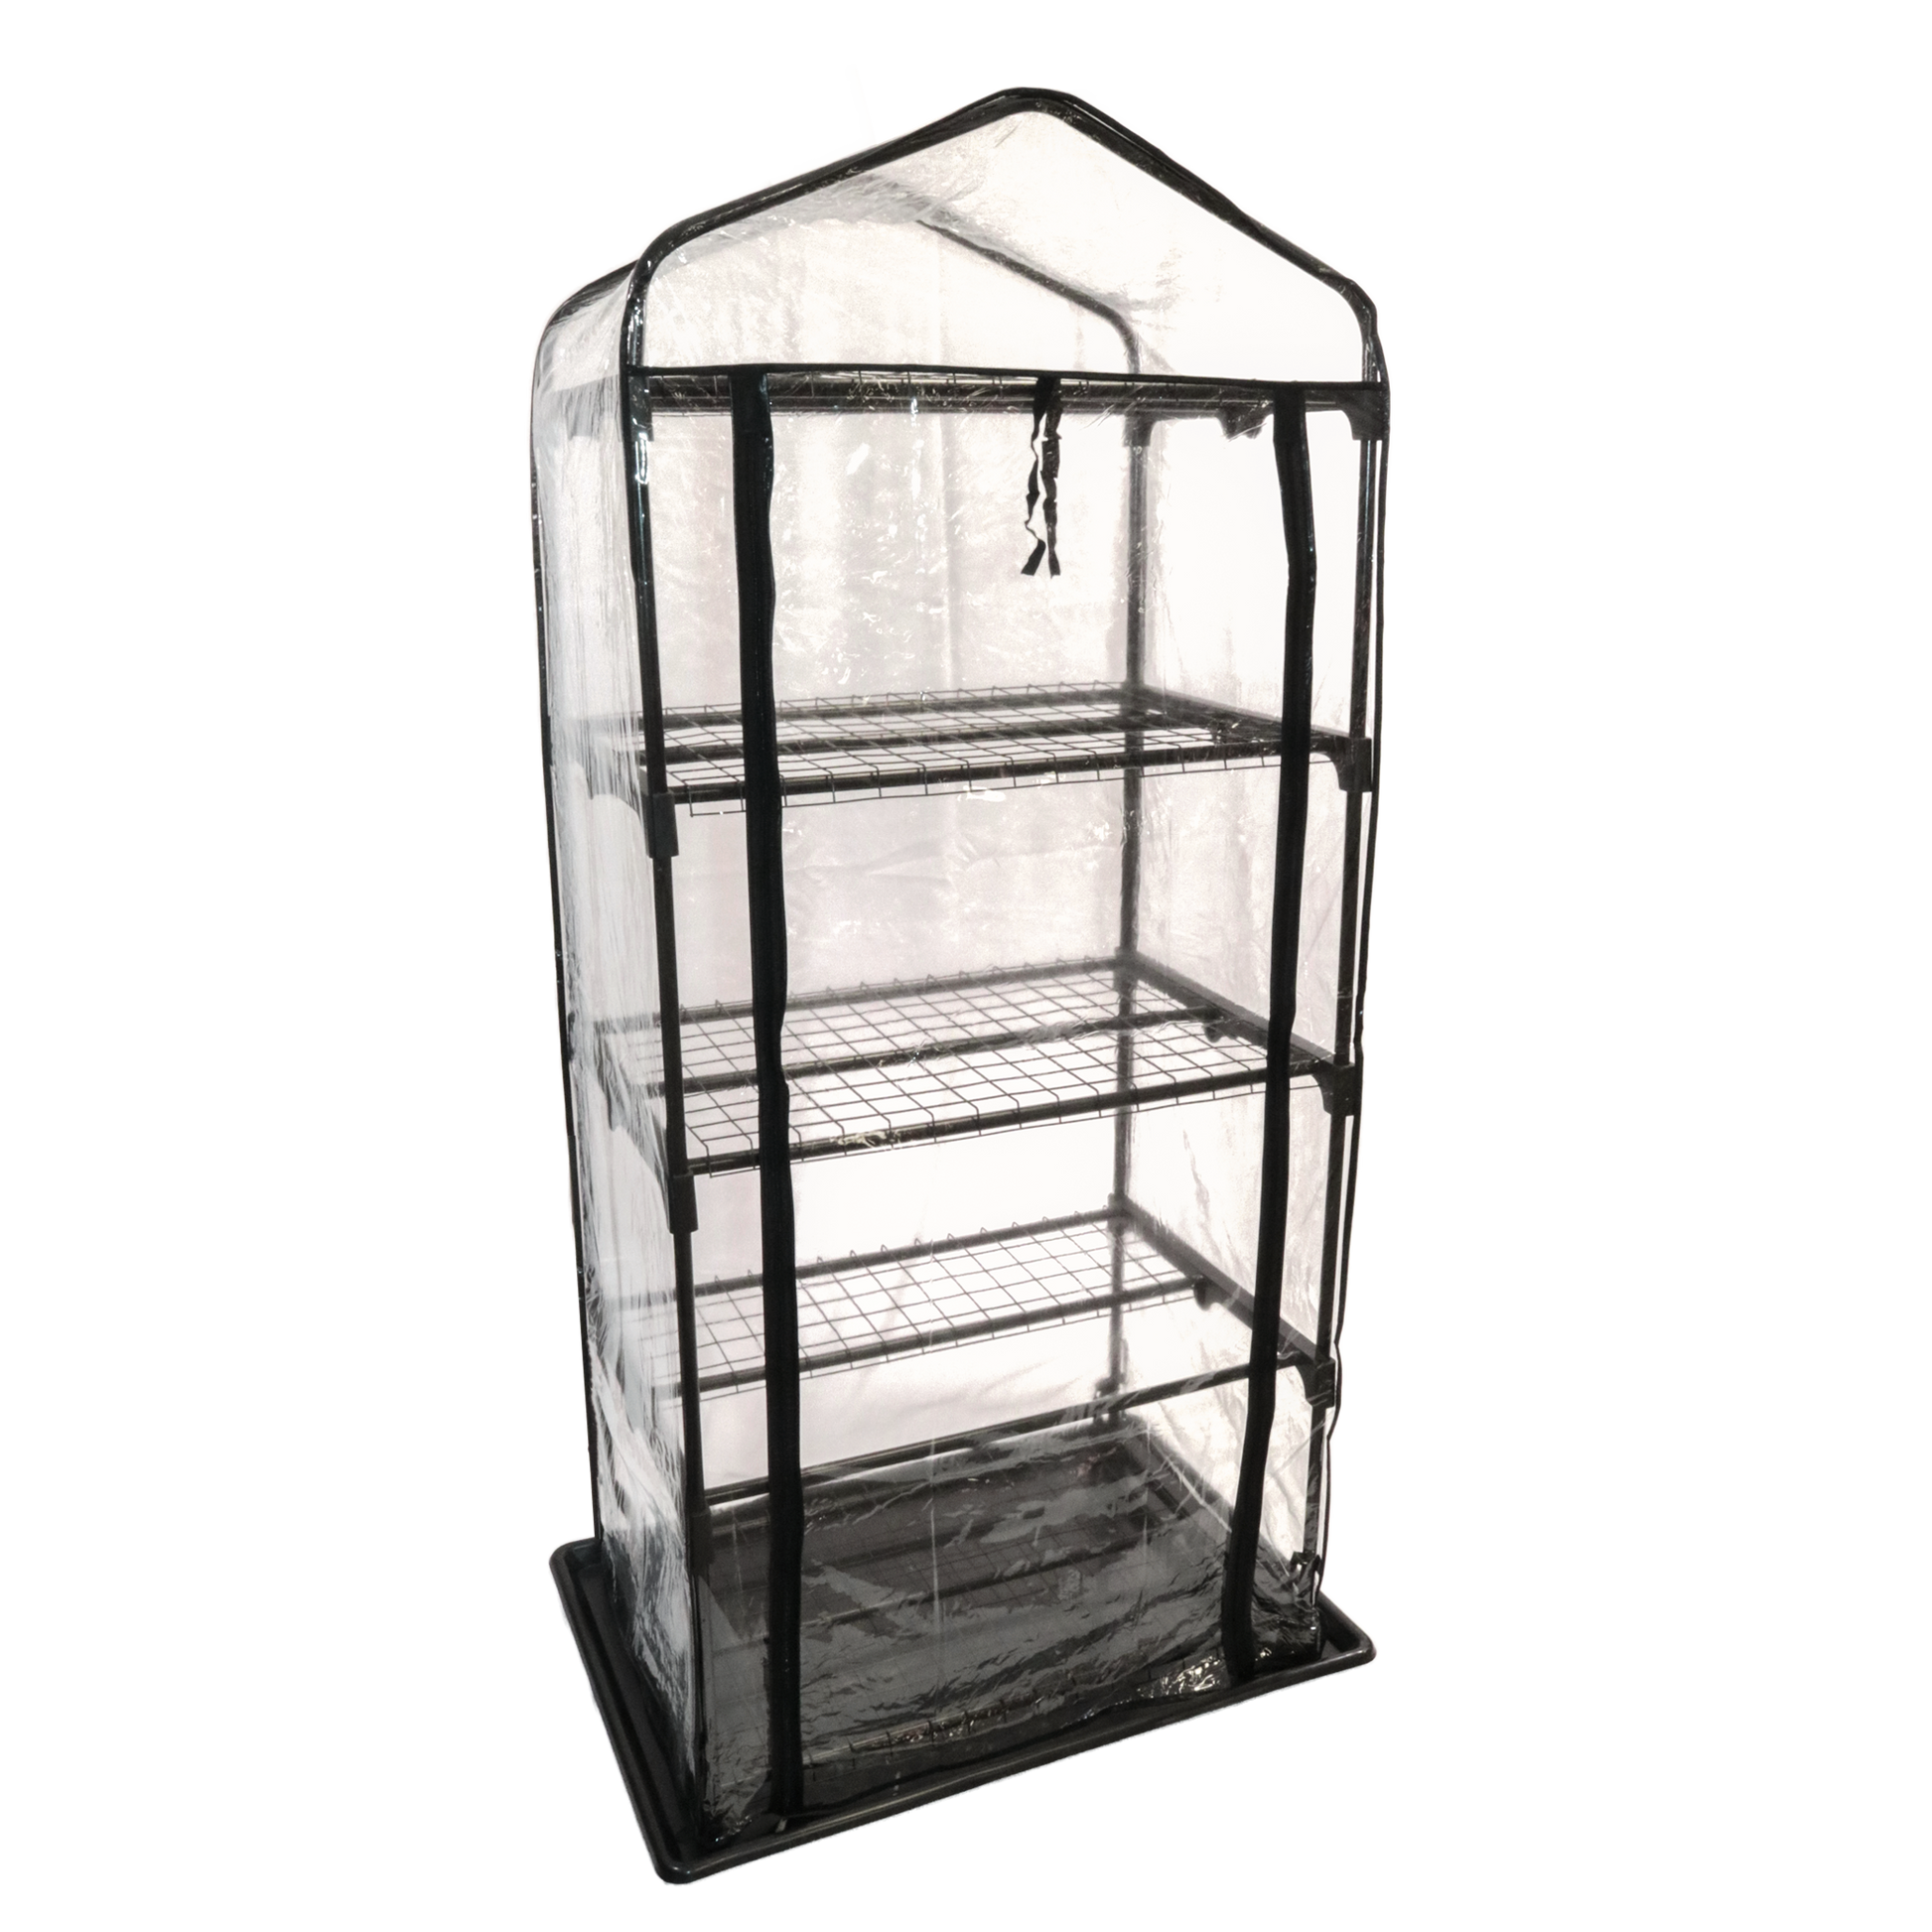 Angled view of a small transparent grow tent with multiple tiers, suitable for growing a variety of plants or fungi in a controlled environment.